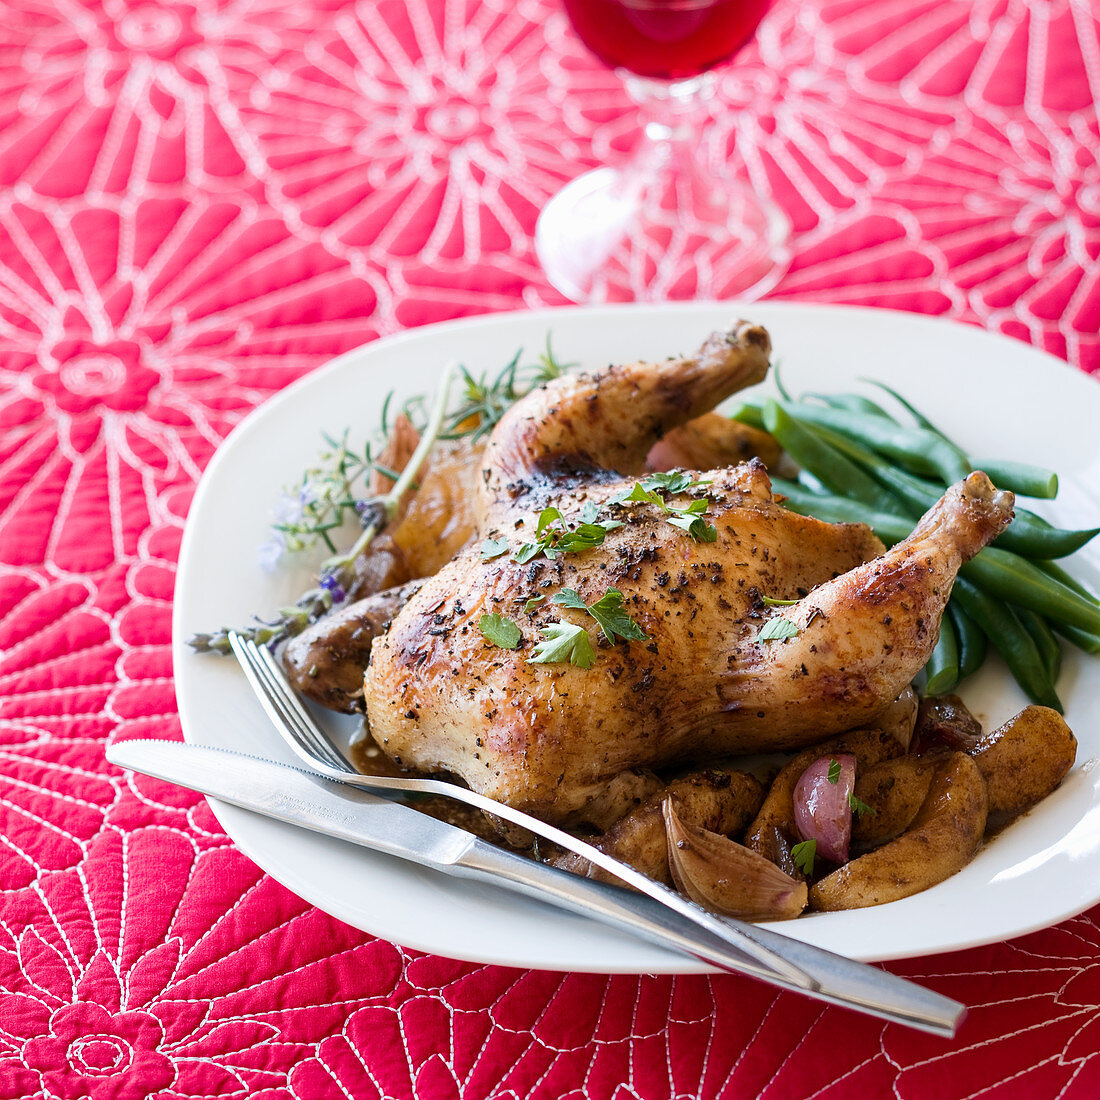 Roast chicken with potatoes, green beans, shallots and herbs